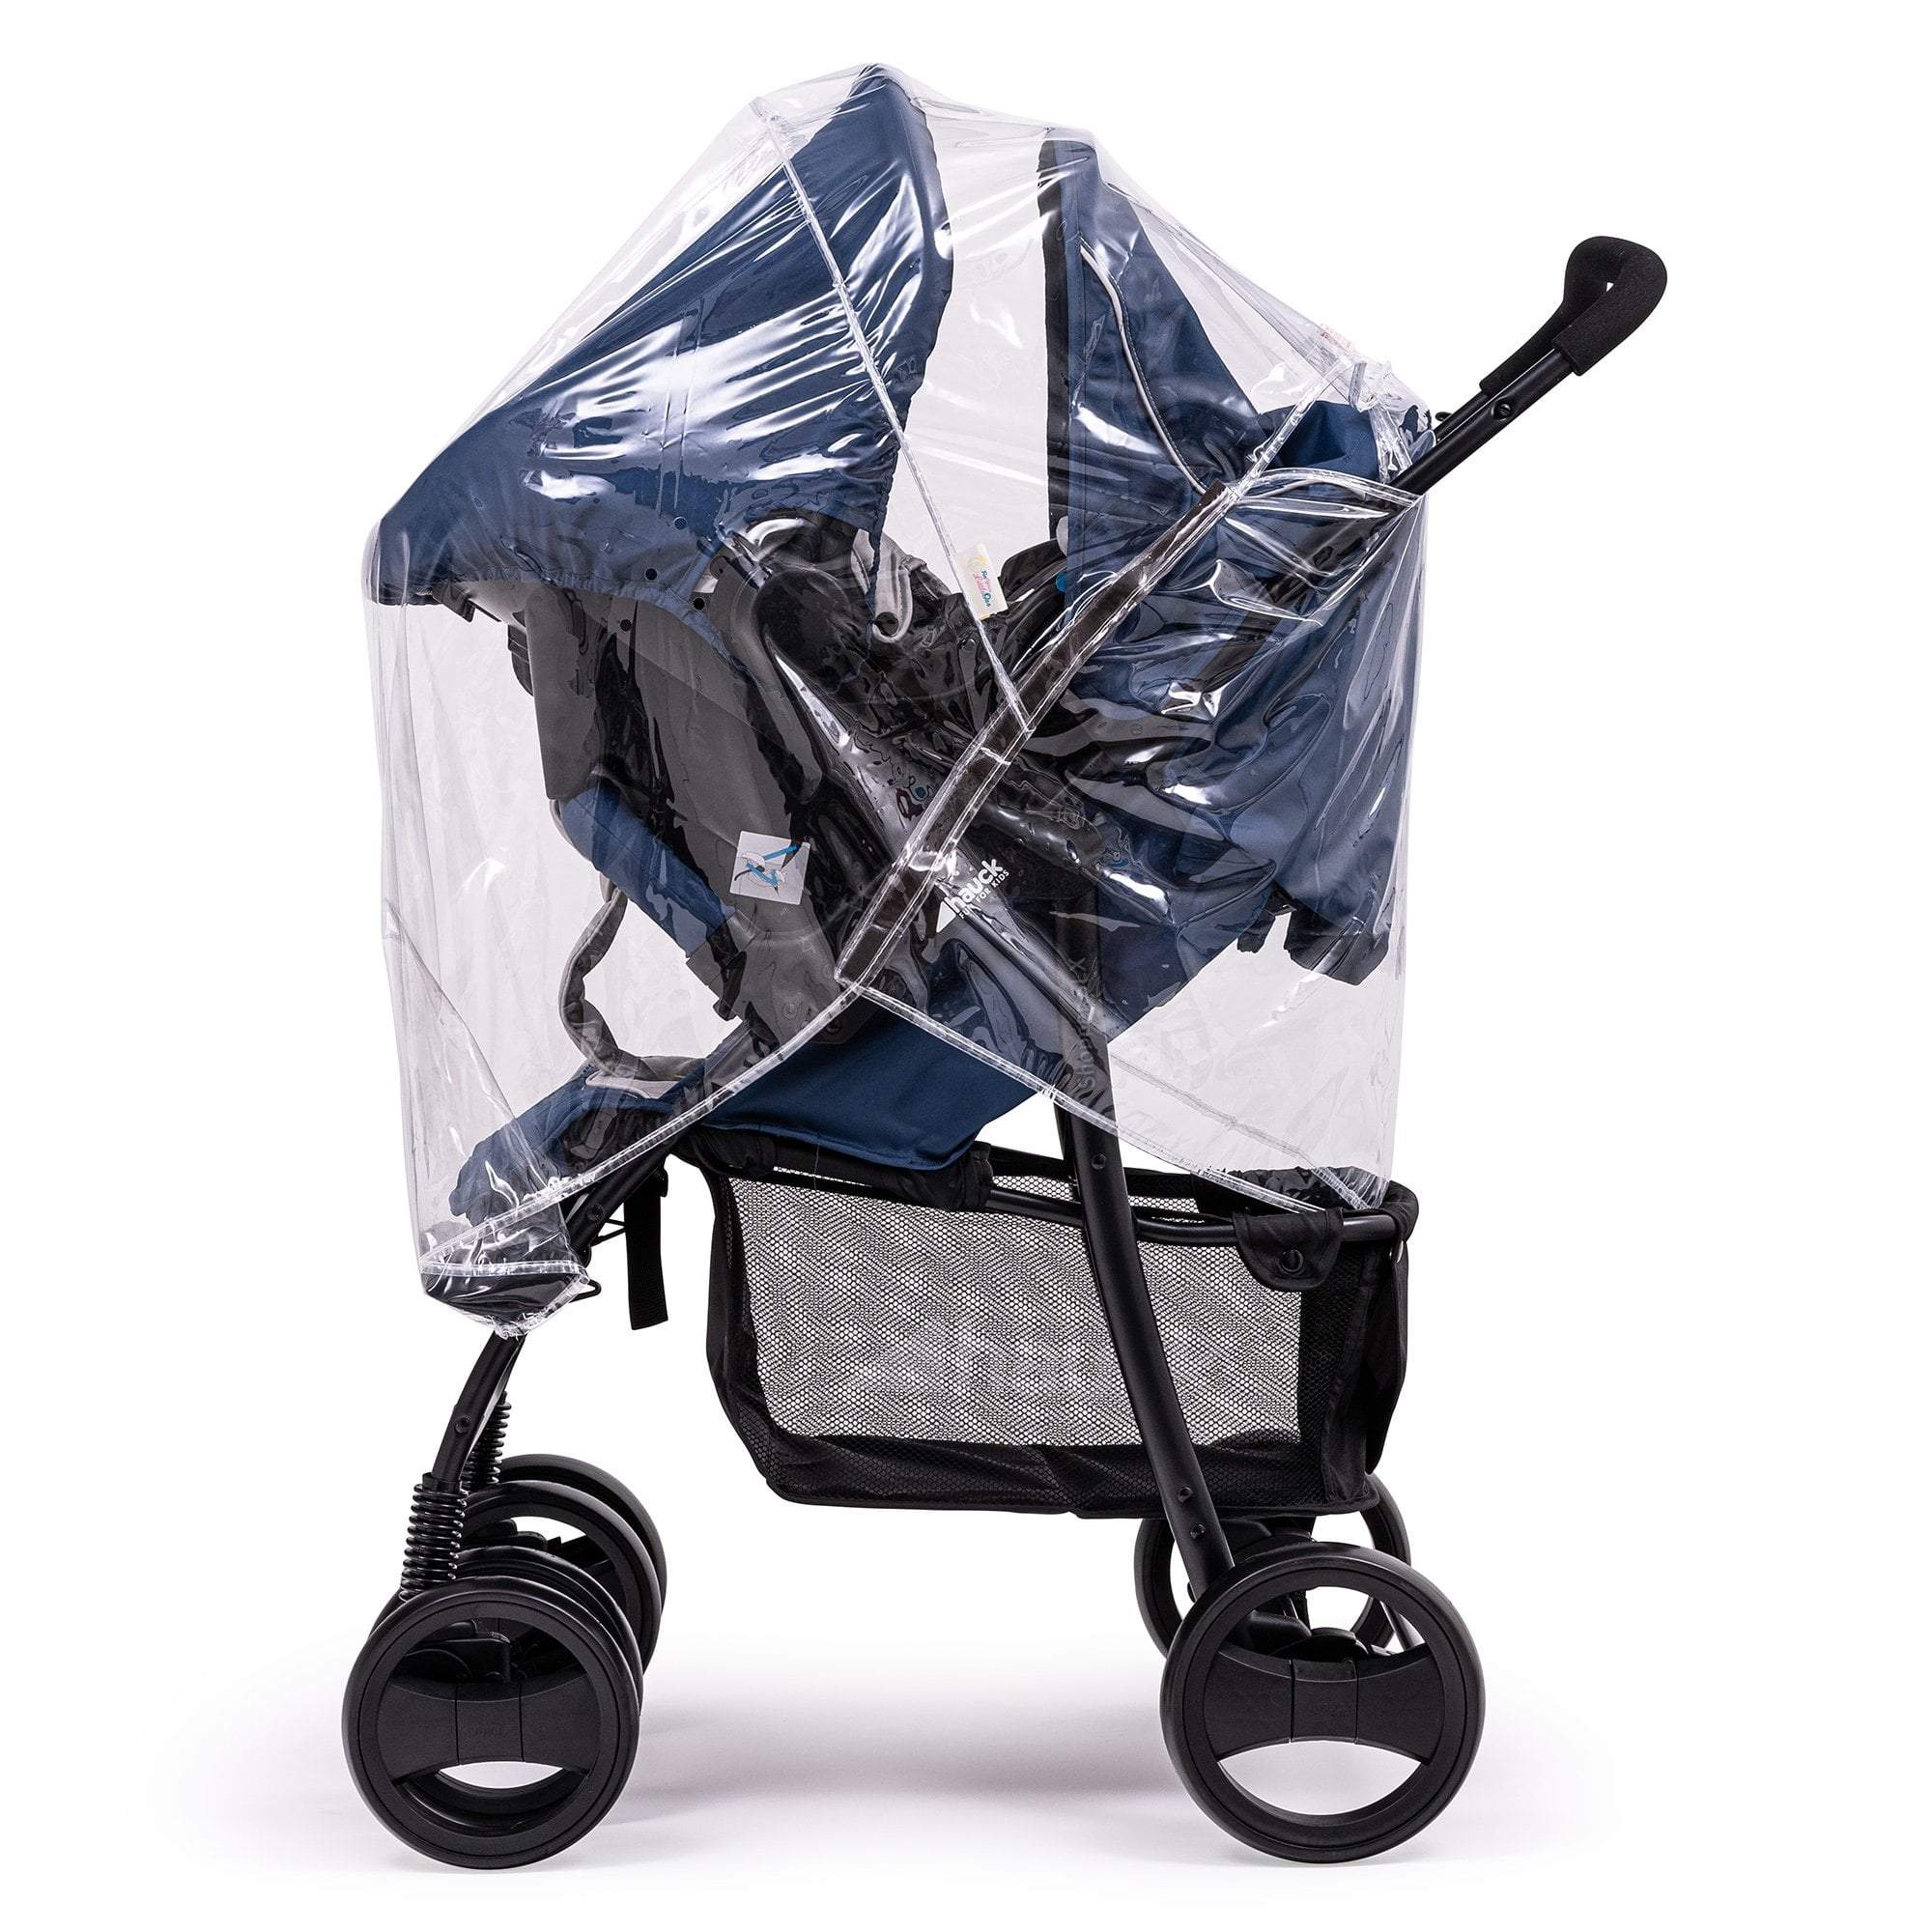 Travel System Raincover Compatible with Safety 1st - Fits All Models - For Your Little One